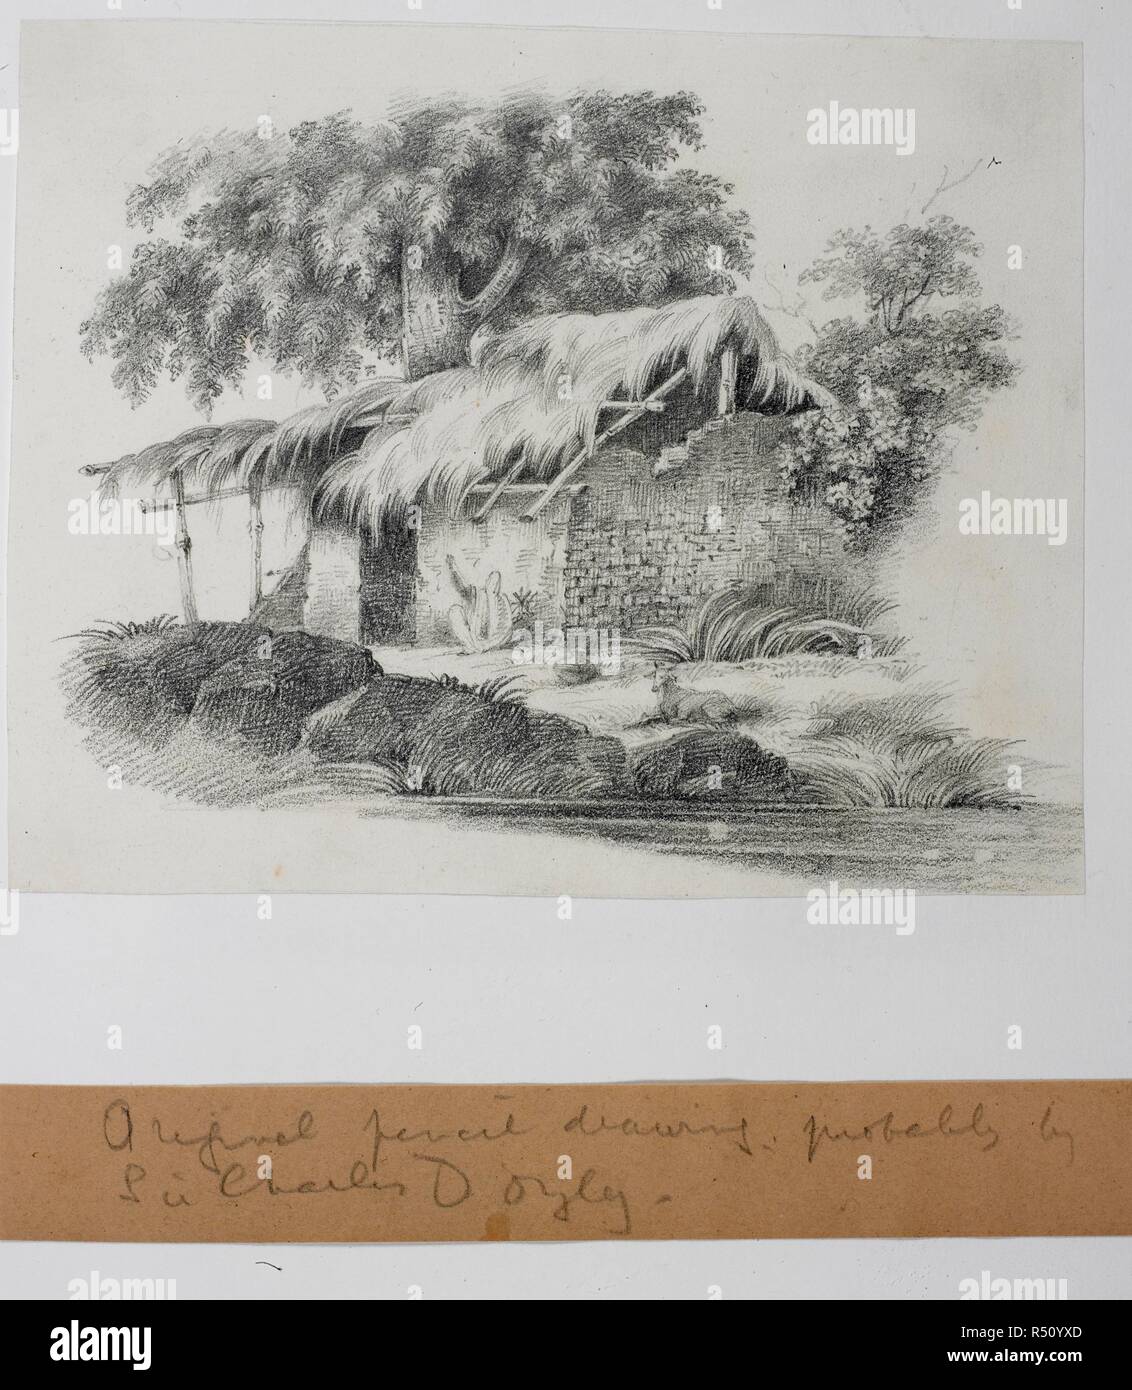 Woman spinning outside her house. Album of 57 views and animal studies in pen and ink and pencil with a number of prints. Ruined thatched hut. Pen and ink; 15.5 by 11.2 cm. Source: WD 4044 f.32. Language: English. Author: d'Orbigny, Charles. Stock Photo